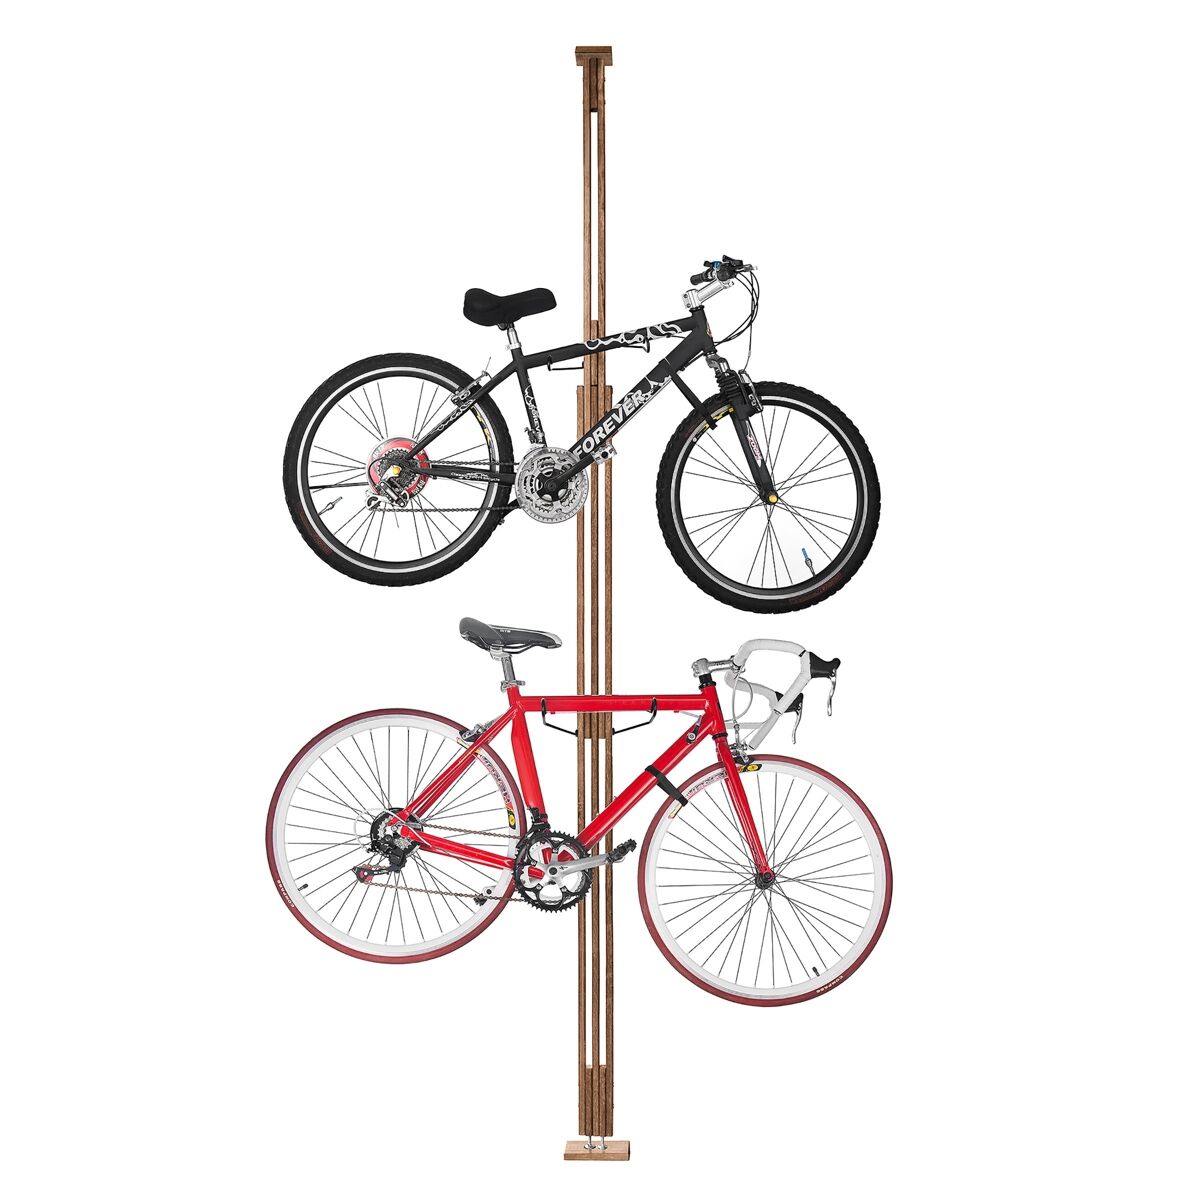 Rad Sportz Bike Rack - Adjustable Wood Hanger for Storing or Displaying Bicycles - Floor to Ceiling Tension Mount Extends from 7 to 10-Feet by Rad Sportz (Brown)